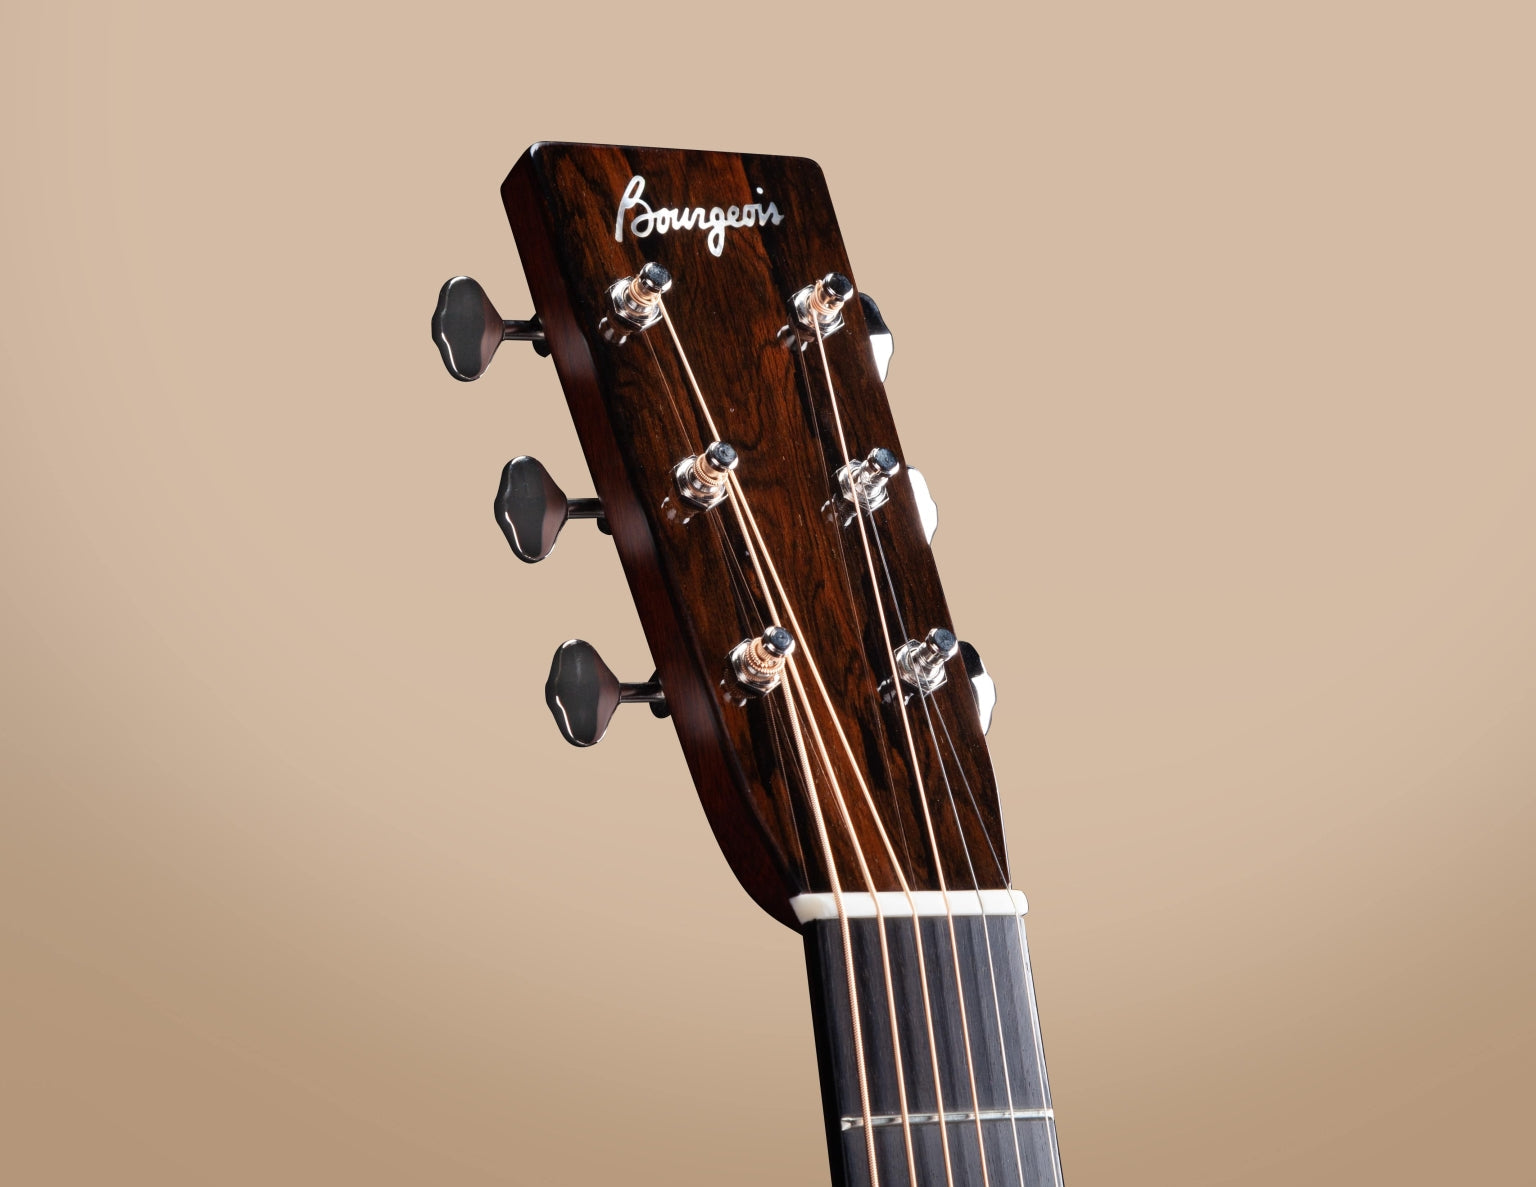 Bourgeois Touchstone Country Boy DCB/TS Dreadnought Acoustic Guitar, Acoustic Guitar for sale at Richards Guitars.